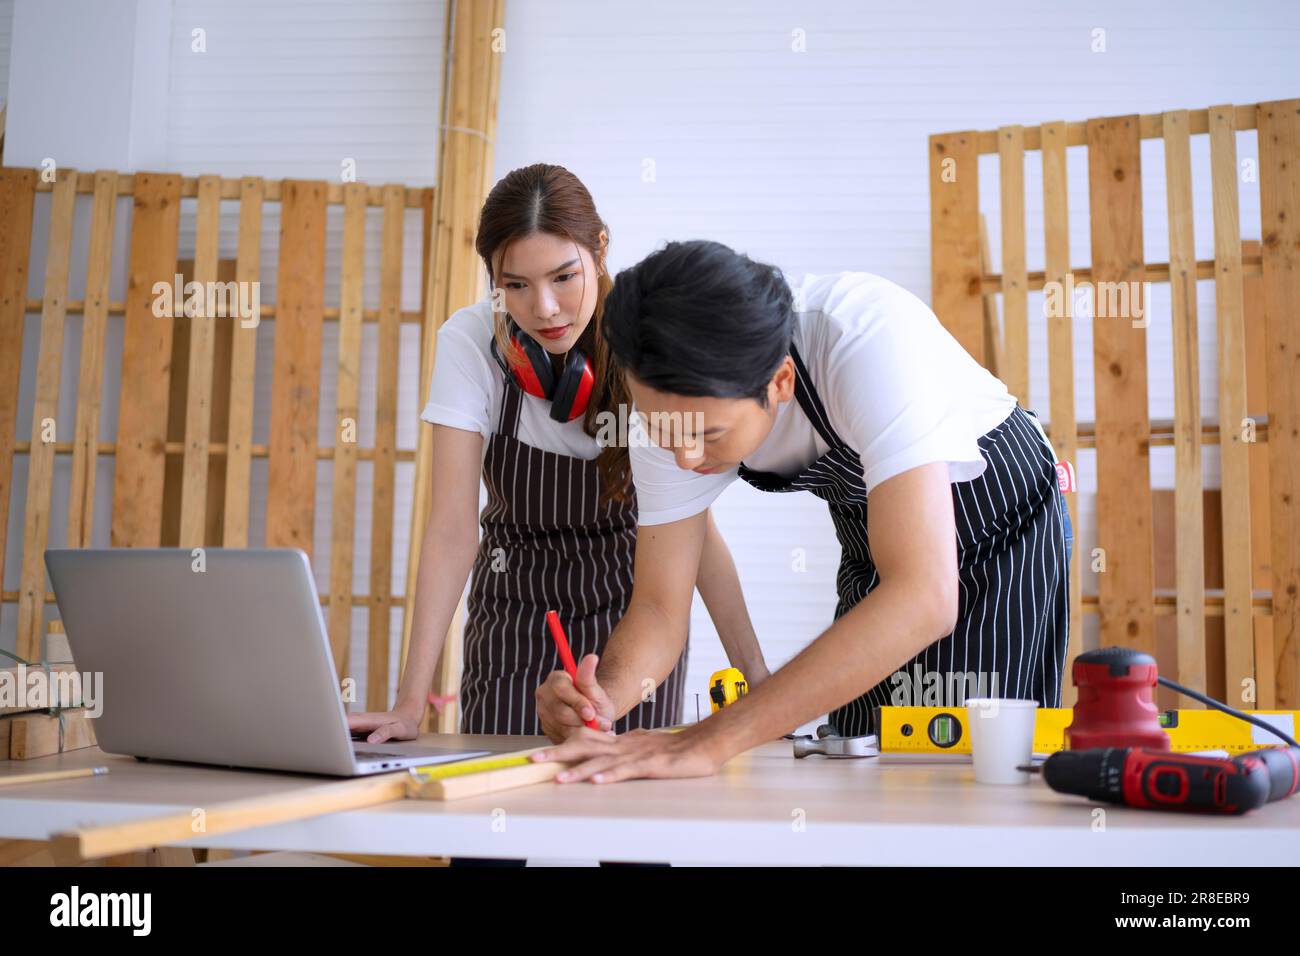 Carpenter work at workshop. Small business and craft product concept. Stock Photo